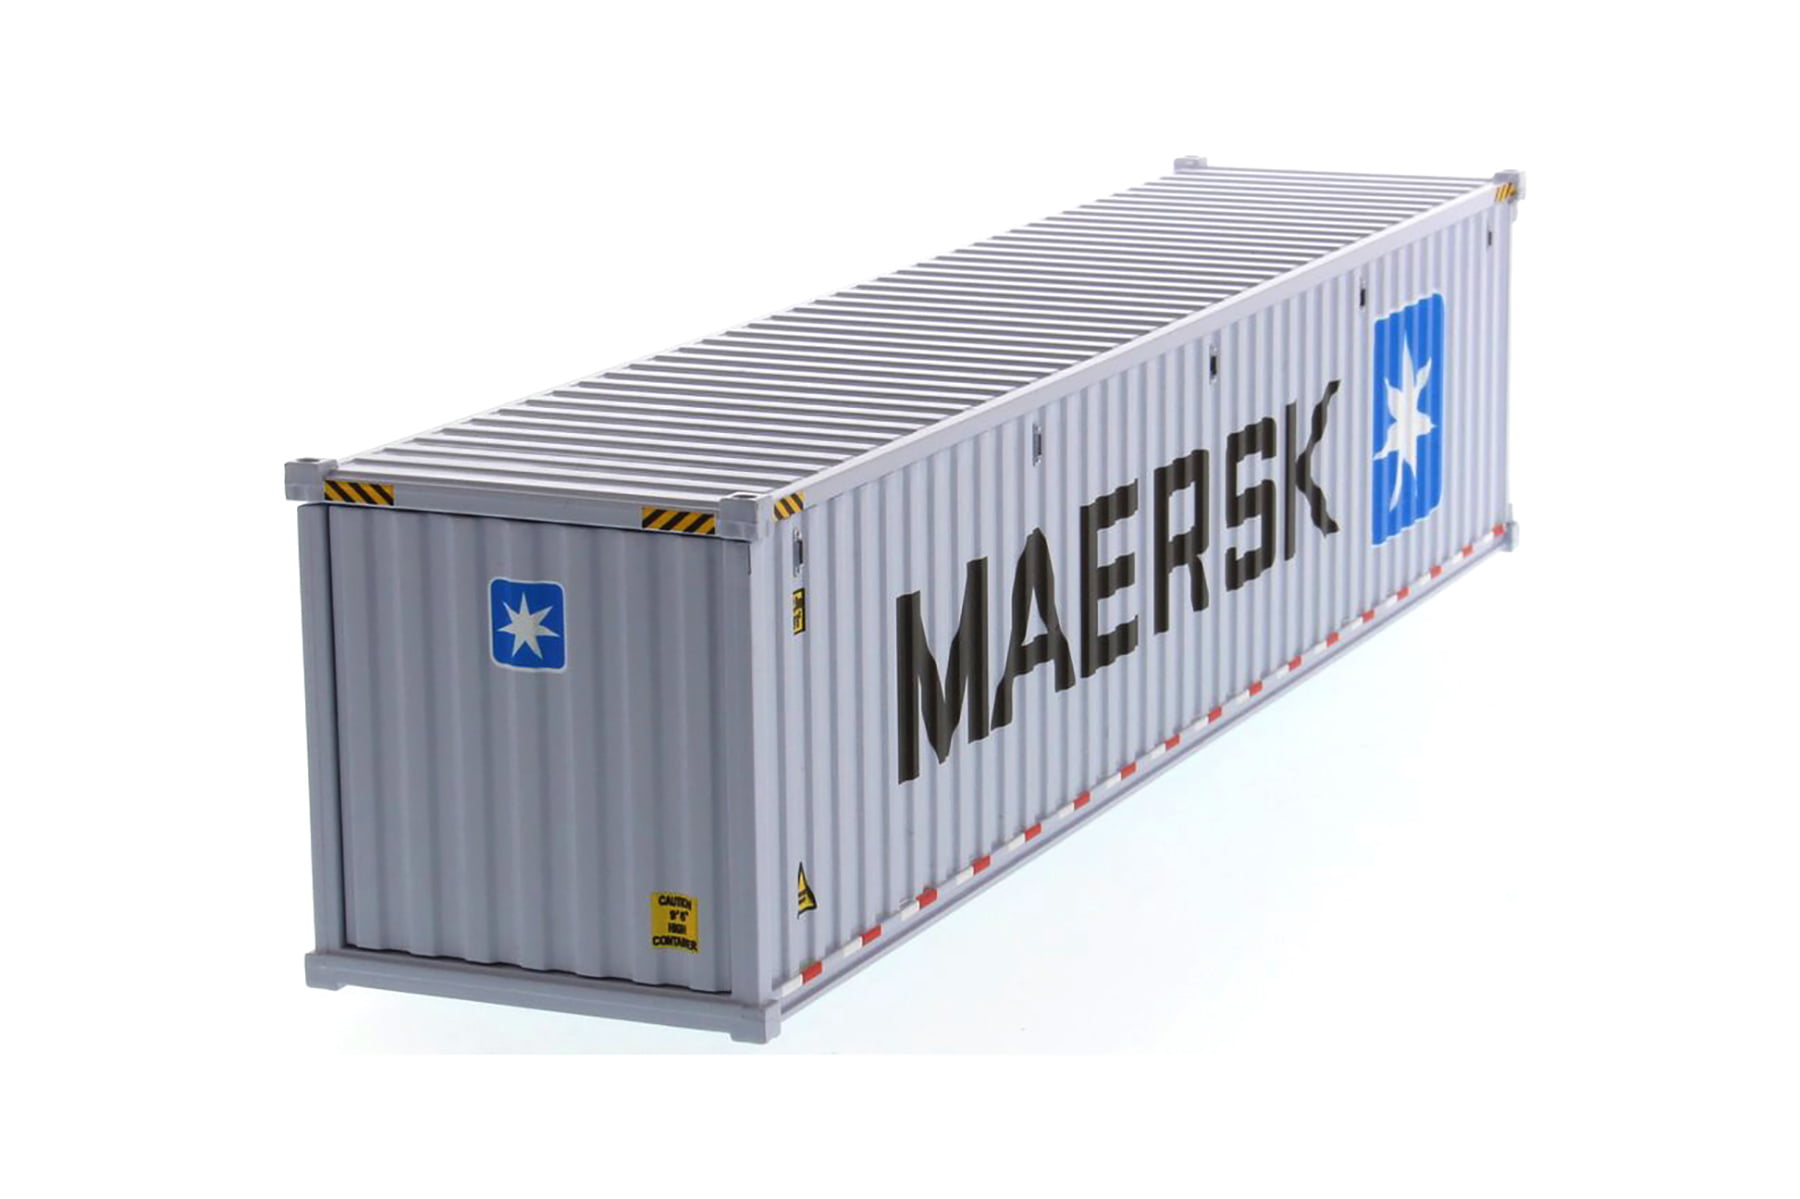 MAERSK 1:20 Sea Transport Cargo Shipping Container Model